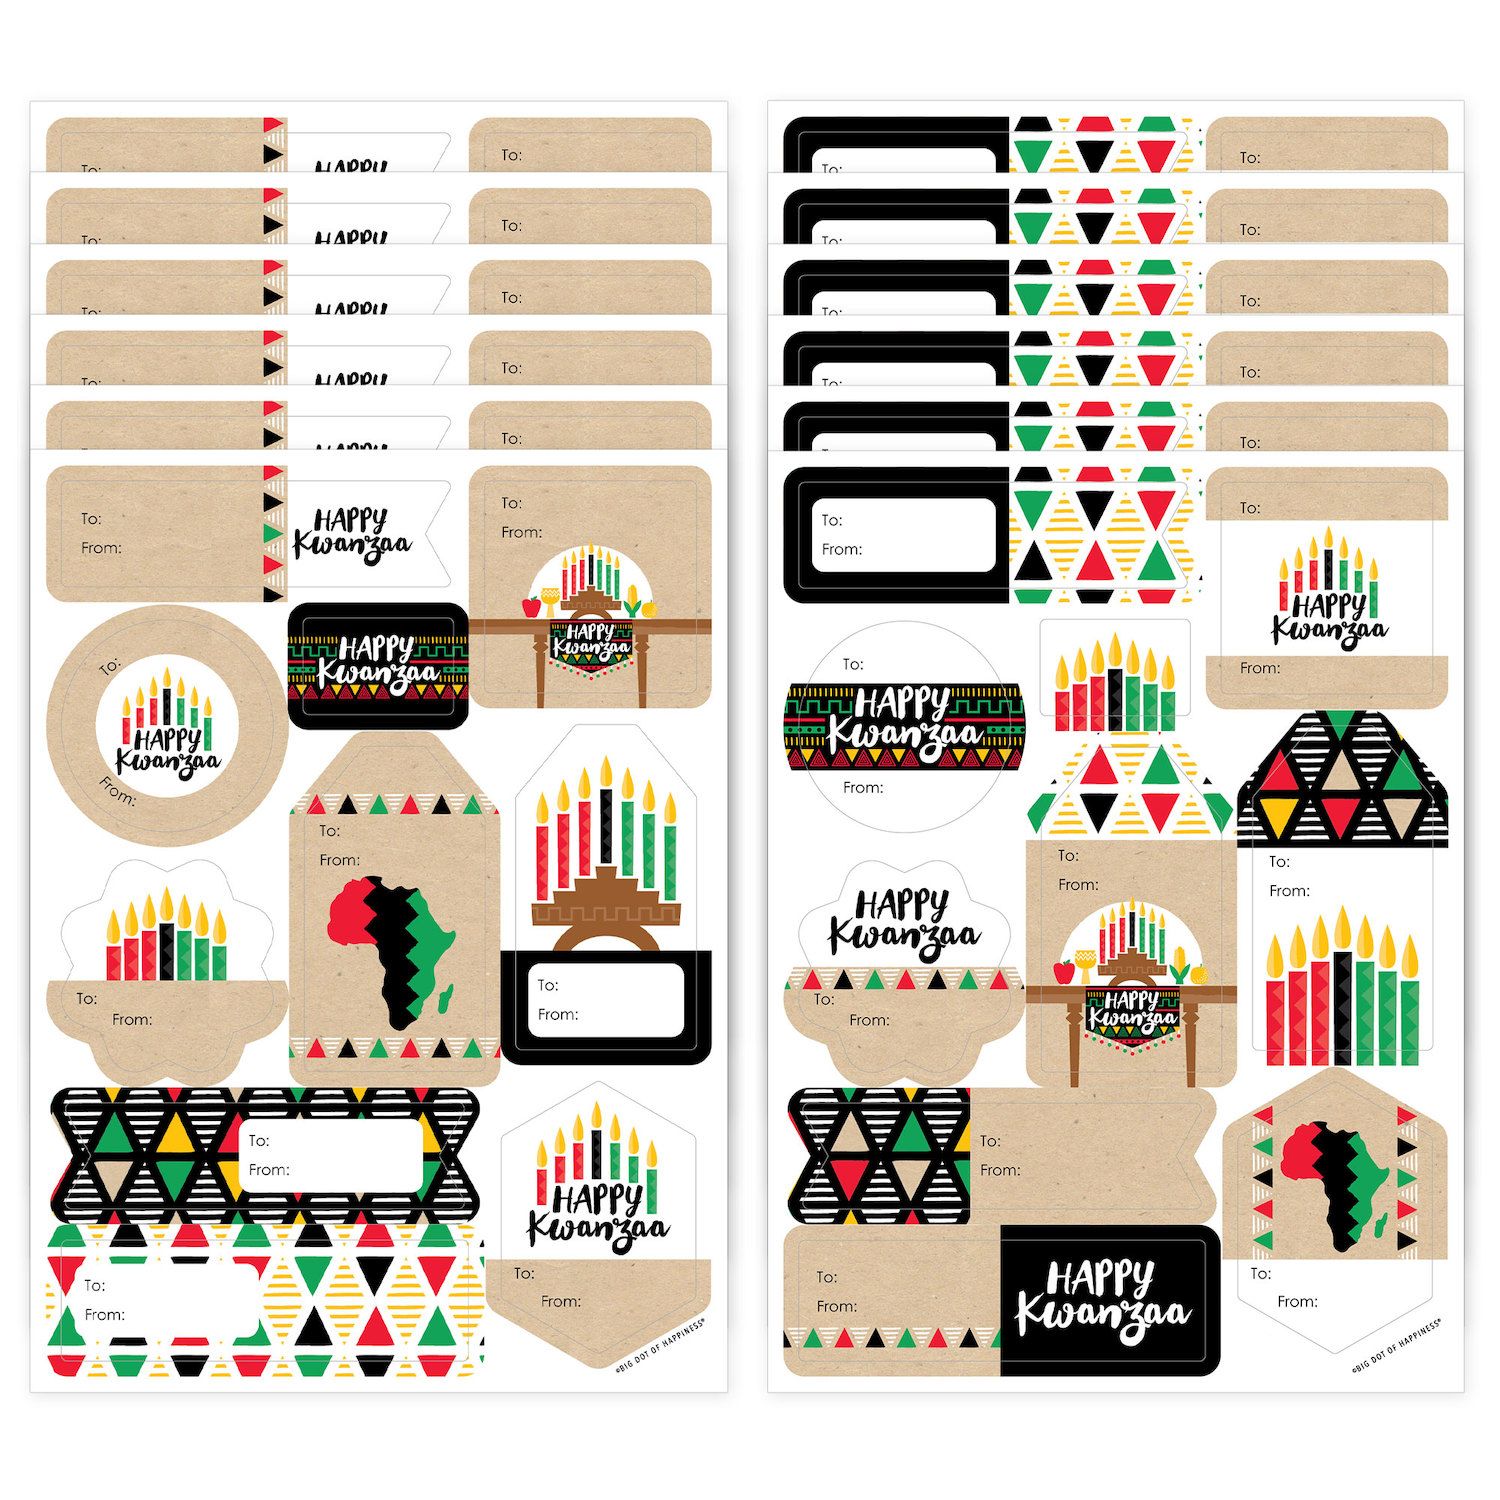 Big Dot of Happiness Happy Kwanzaa Heritage Holiday Party Paper Charger and Table Decorations - Chargerific Kit - Place Setting for 8